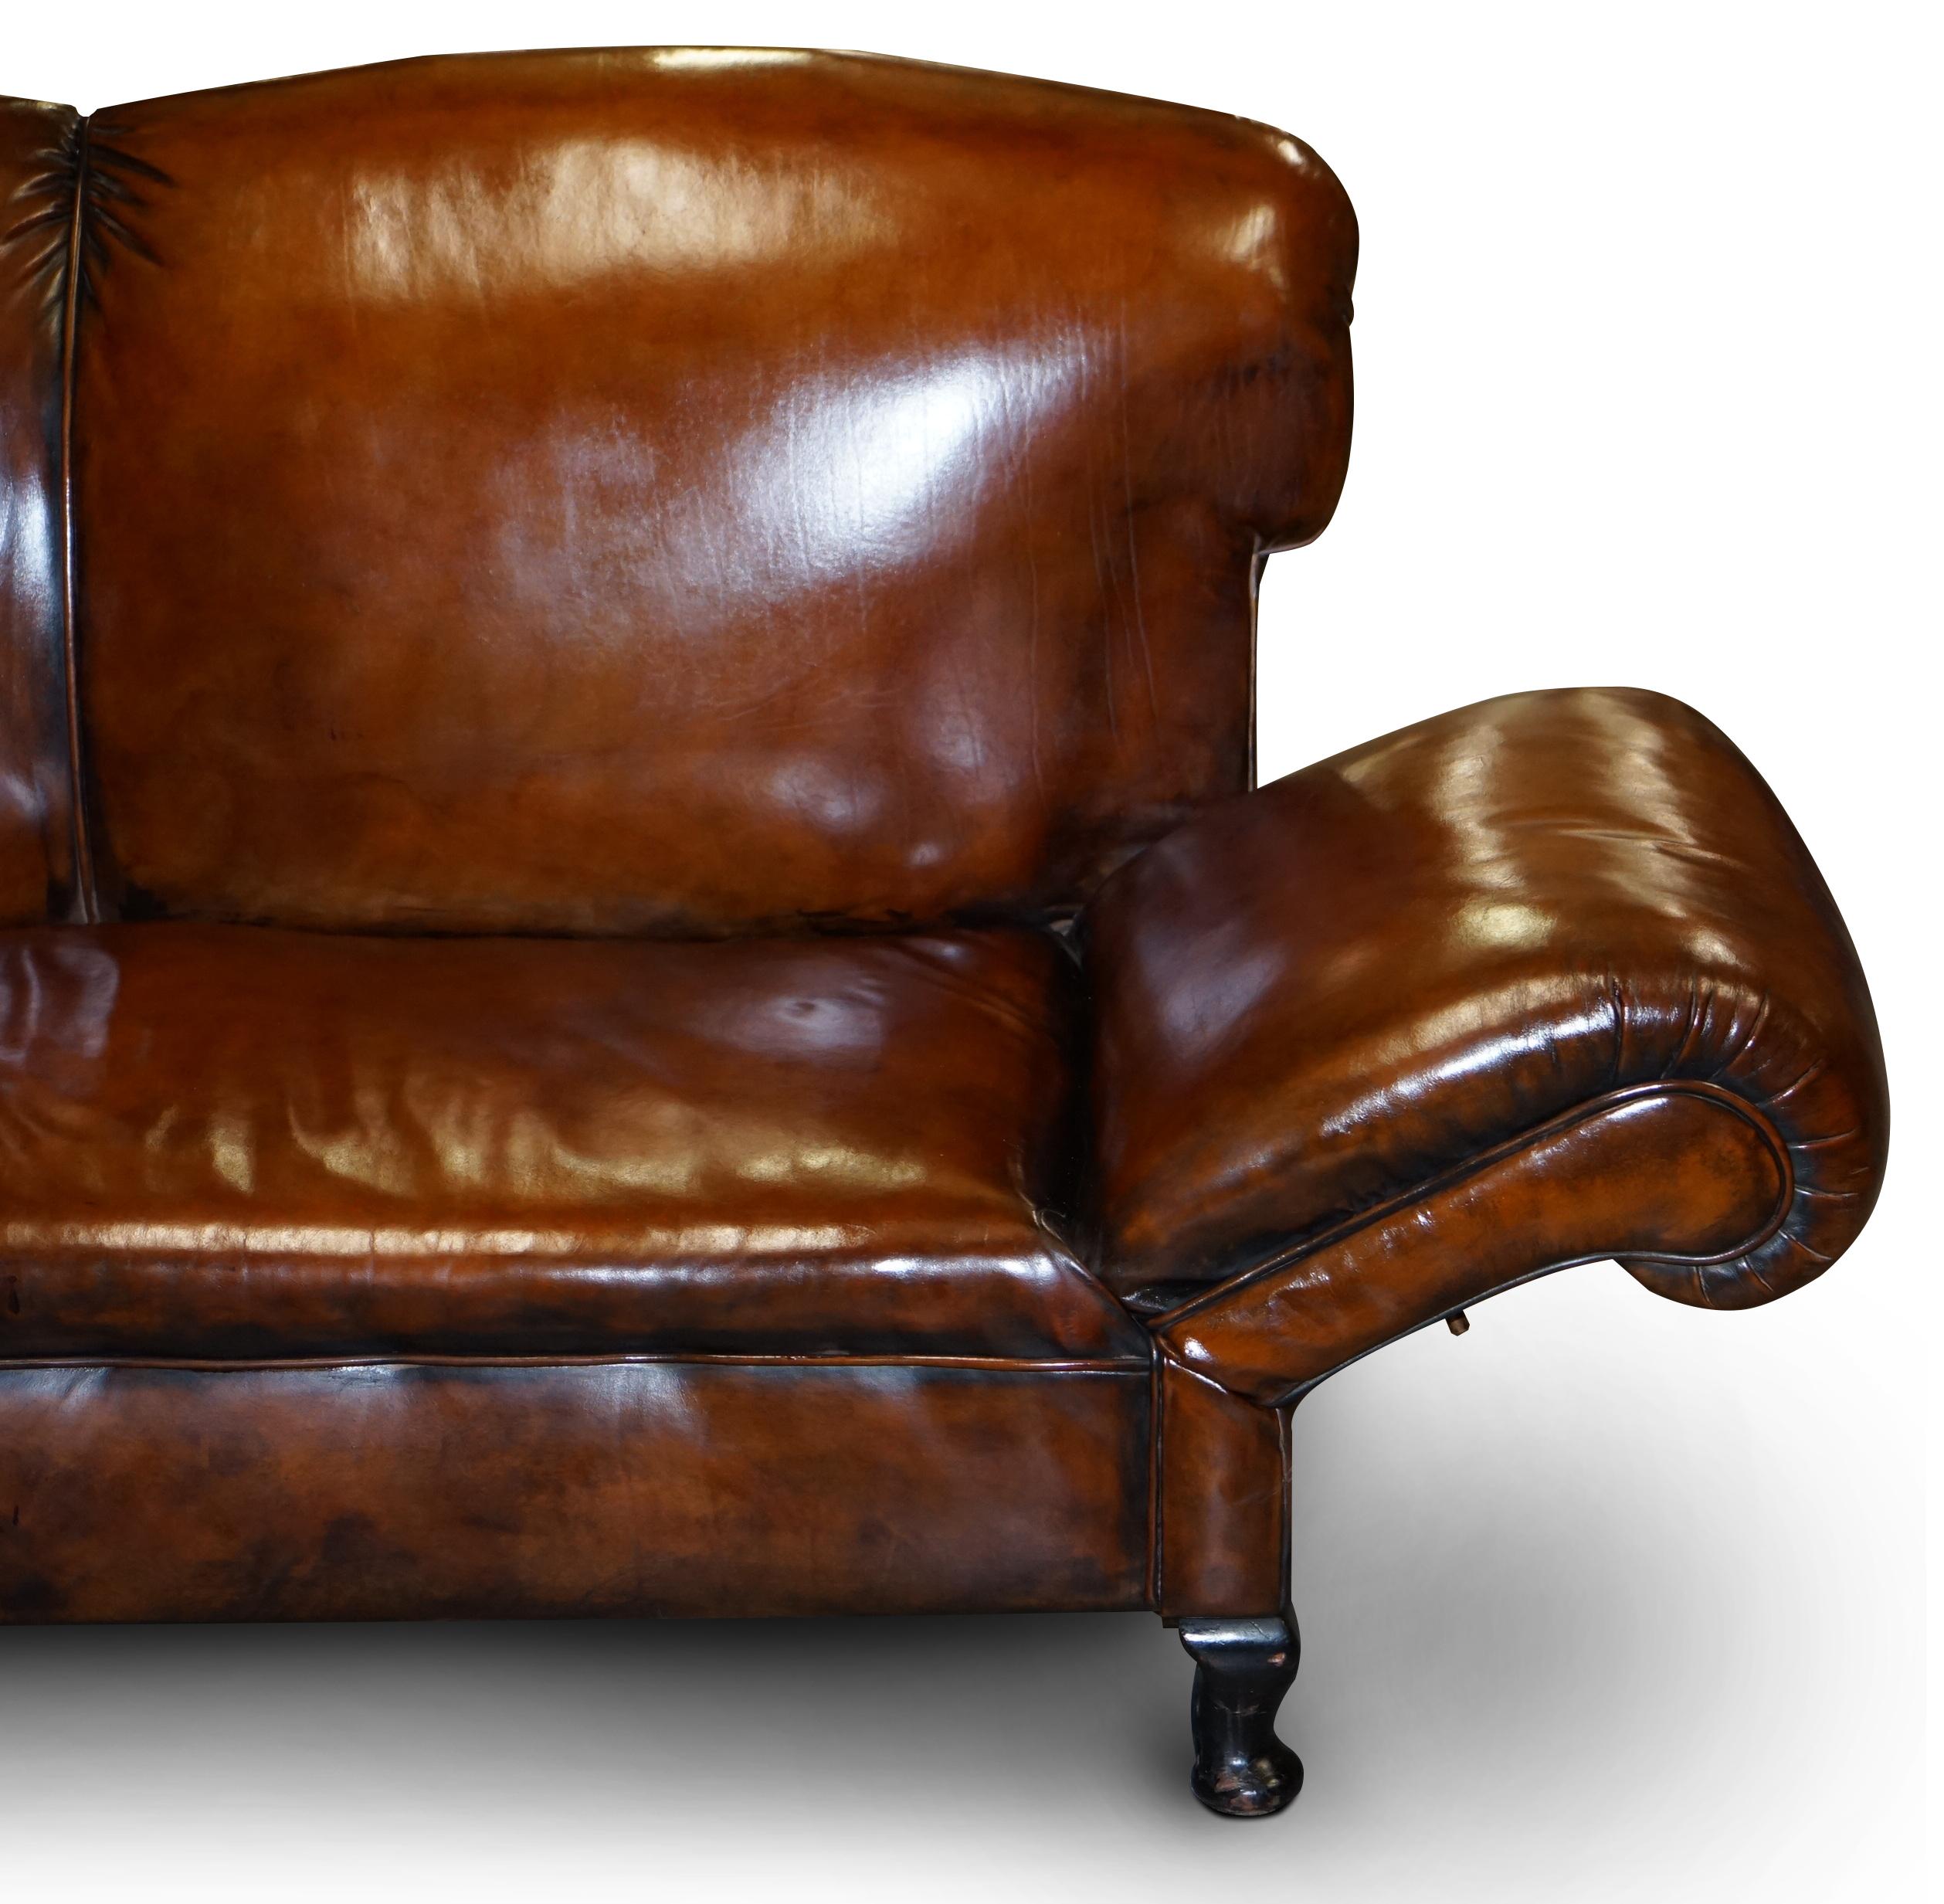 Fully Restored Whisky Brown Leather Drop Arm Chaise Lounge Sofa Horse Hair Fill For Sale 8